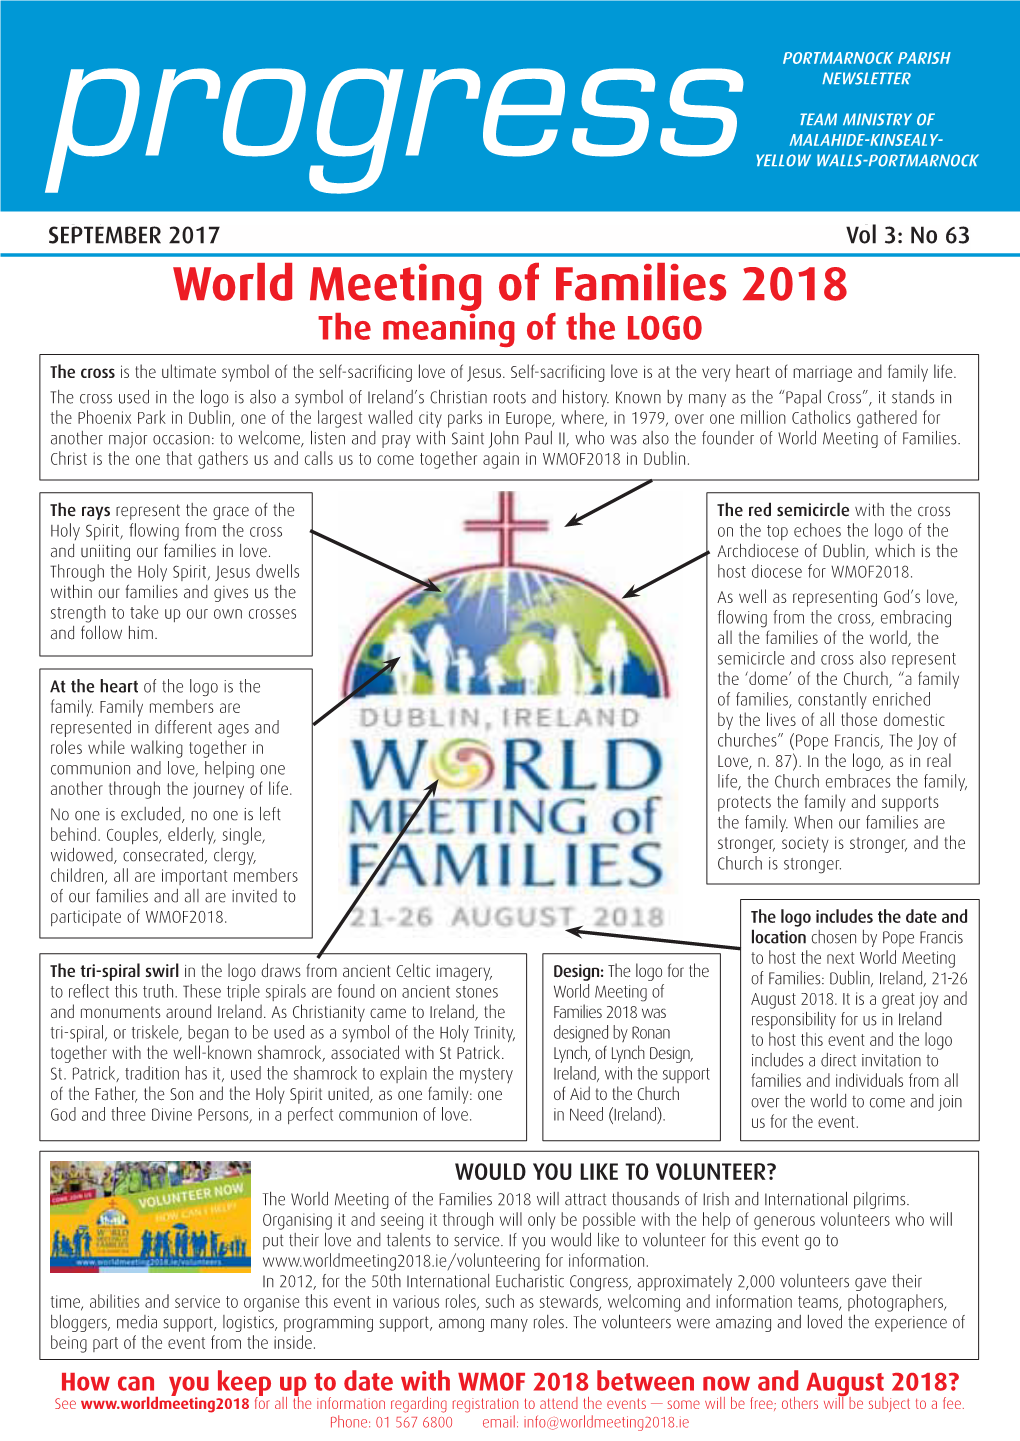 World Meeting of Families 2018 the Meaning of the LOGO